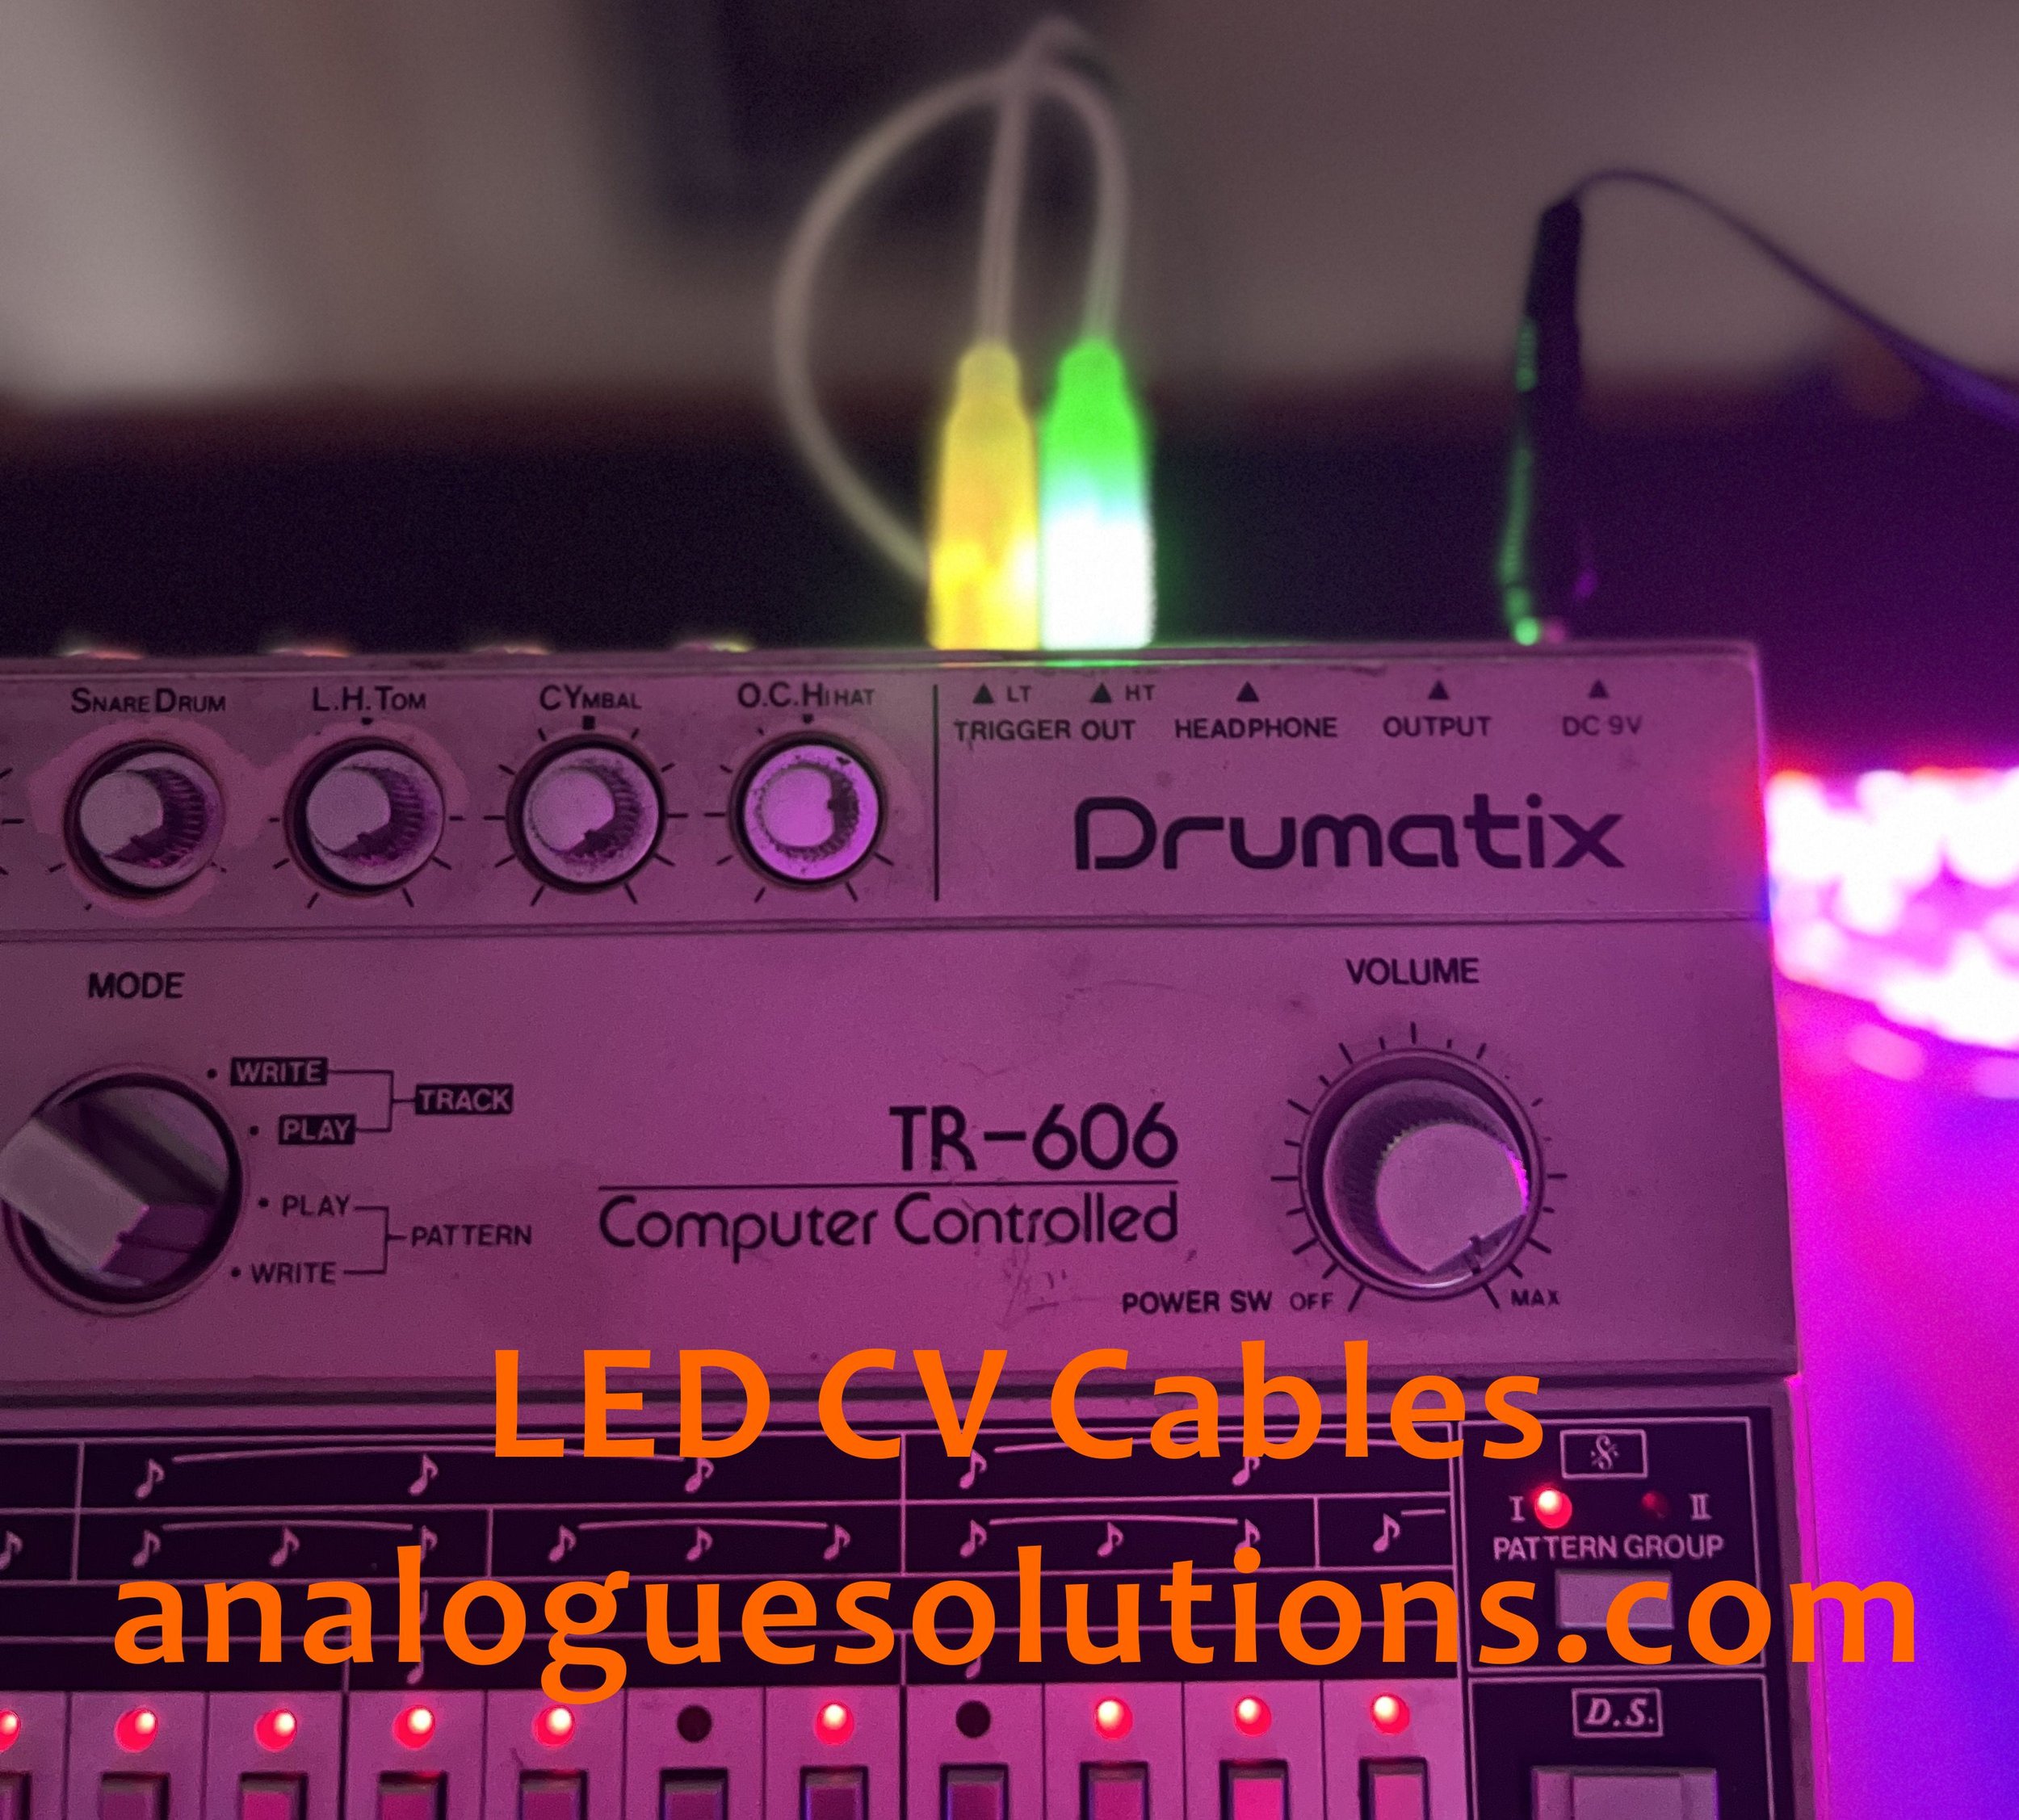 analogue solutions led cv cables roland tr606 .jpg